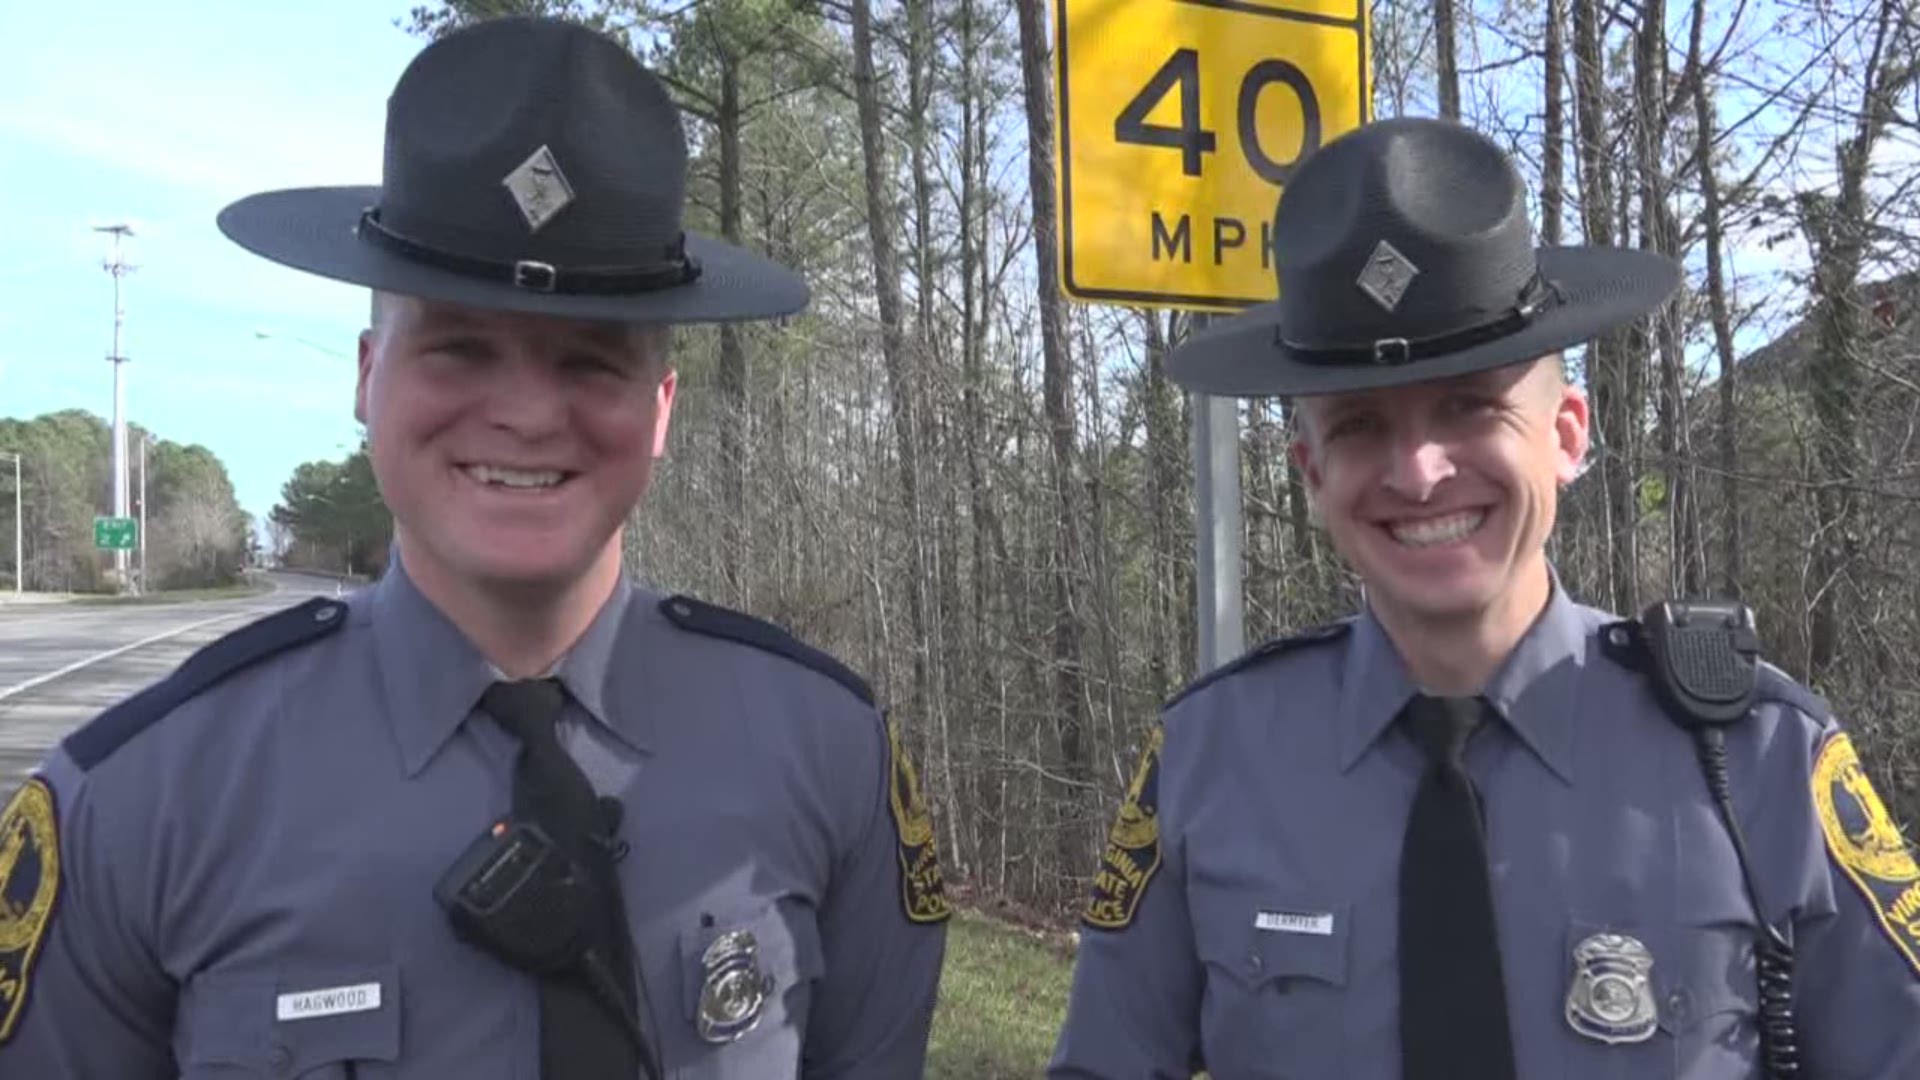 13News Now LaSalle Blanks takes us back to when he got the chance to meet the Virginia State trooper who died in a Richmond shooting.